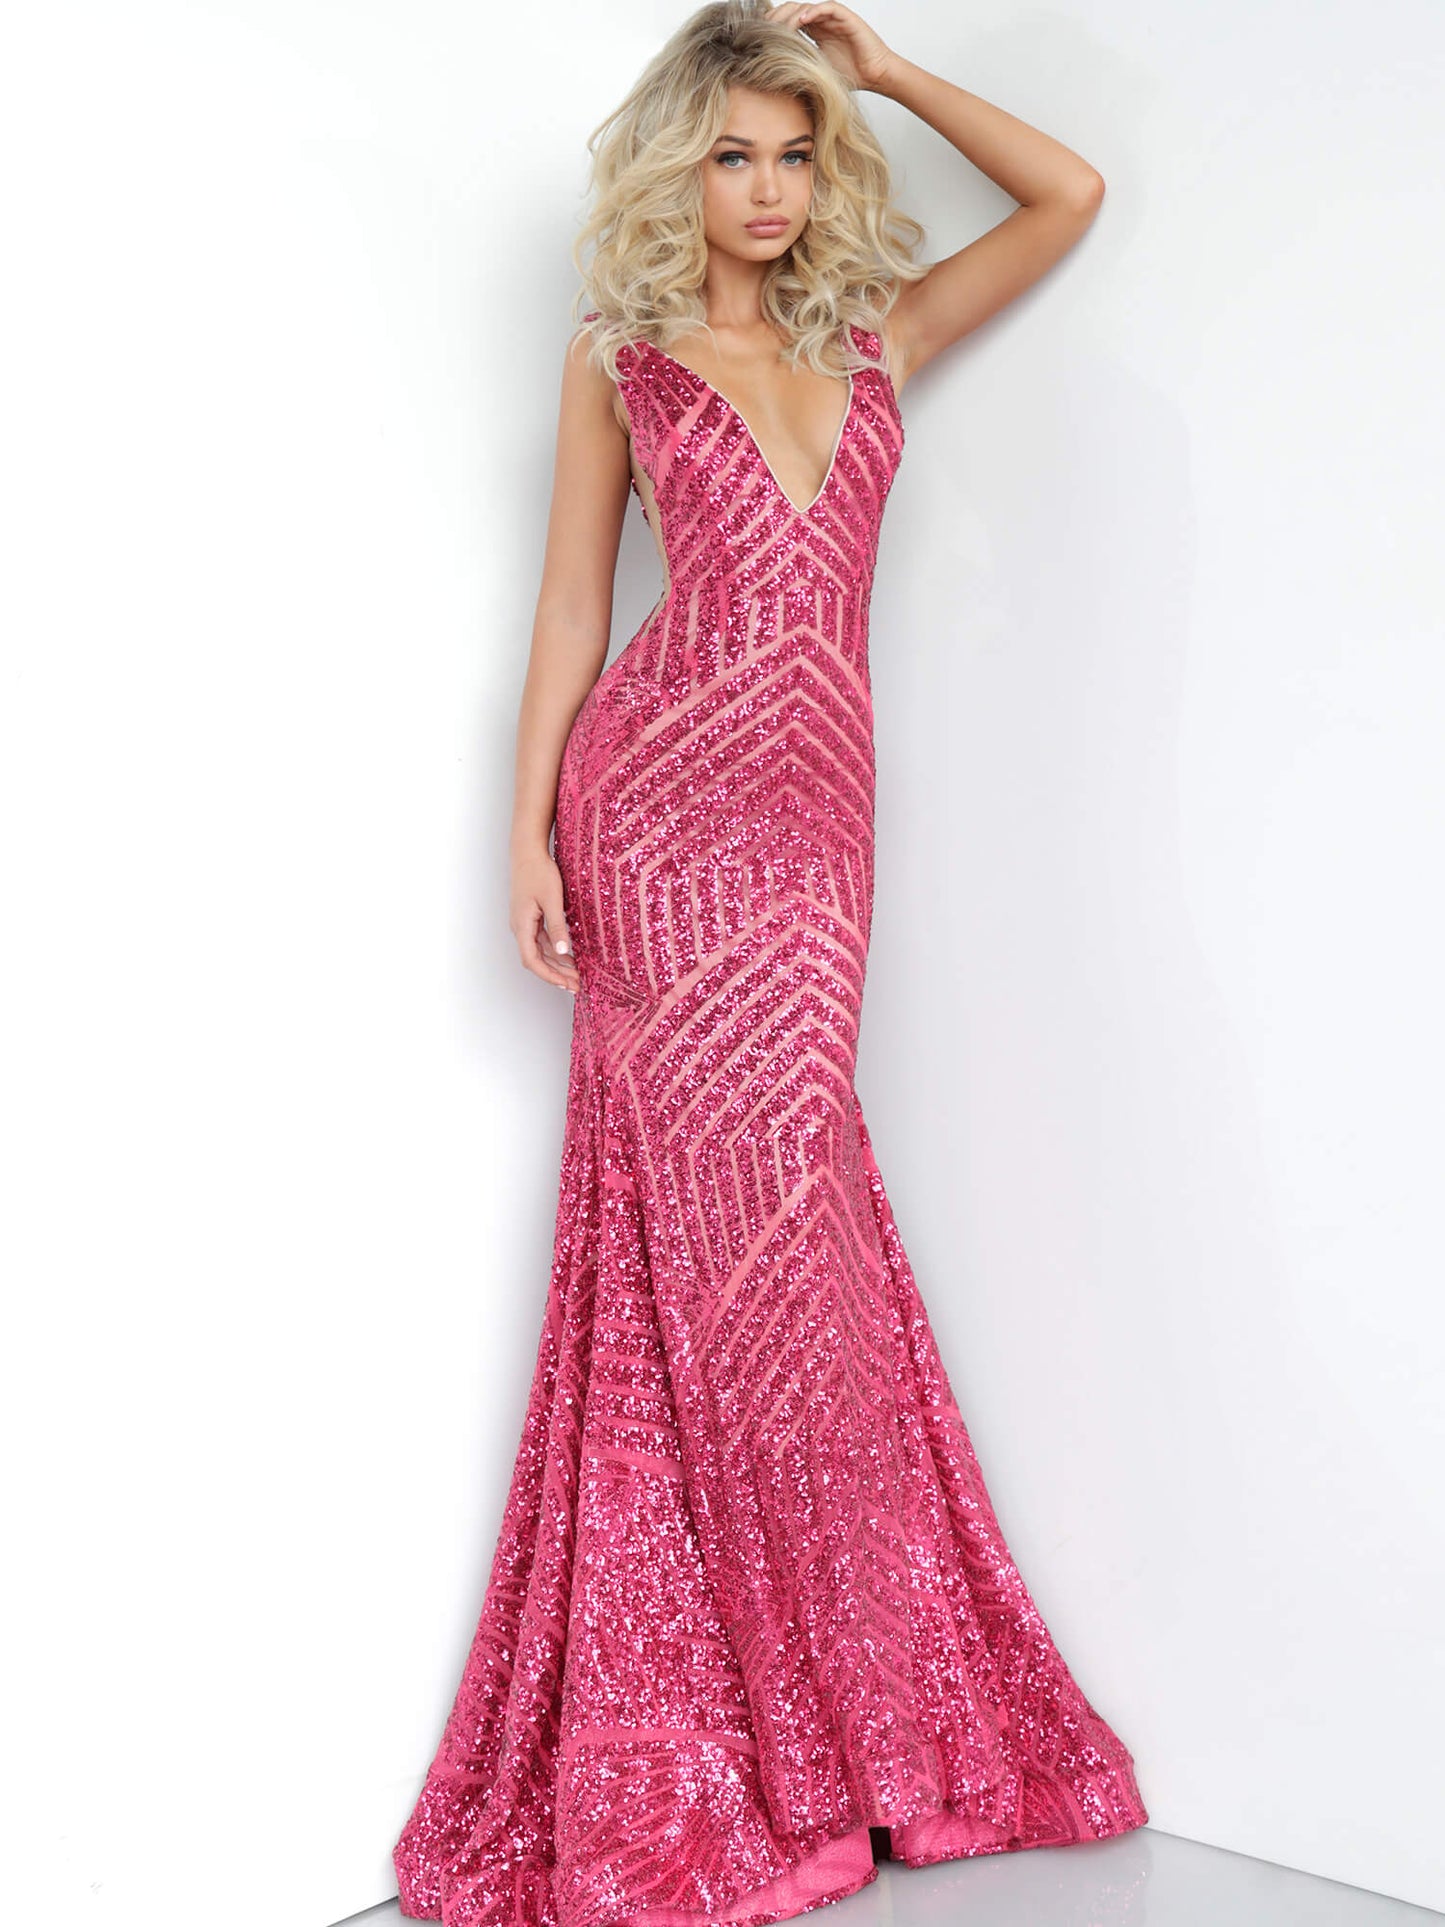 Jovani 59762 Deep V neckline Sequin Embellished mermaid Pageant Prom Dress, Deep V Neckline with sheer mesh side cutout panels. lush trumpet skirt with sweeping train  Available Color: Fuchsia  Available Size: 8